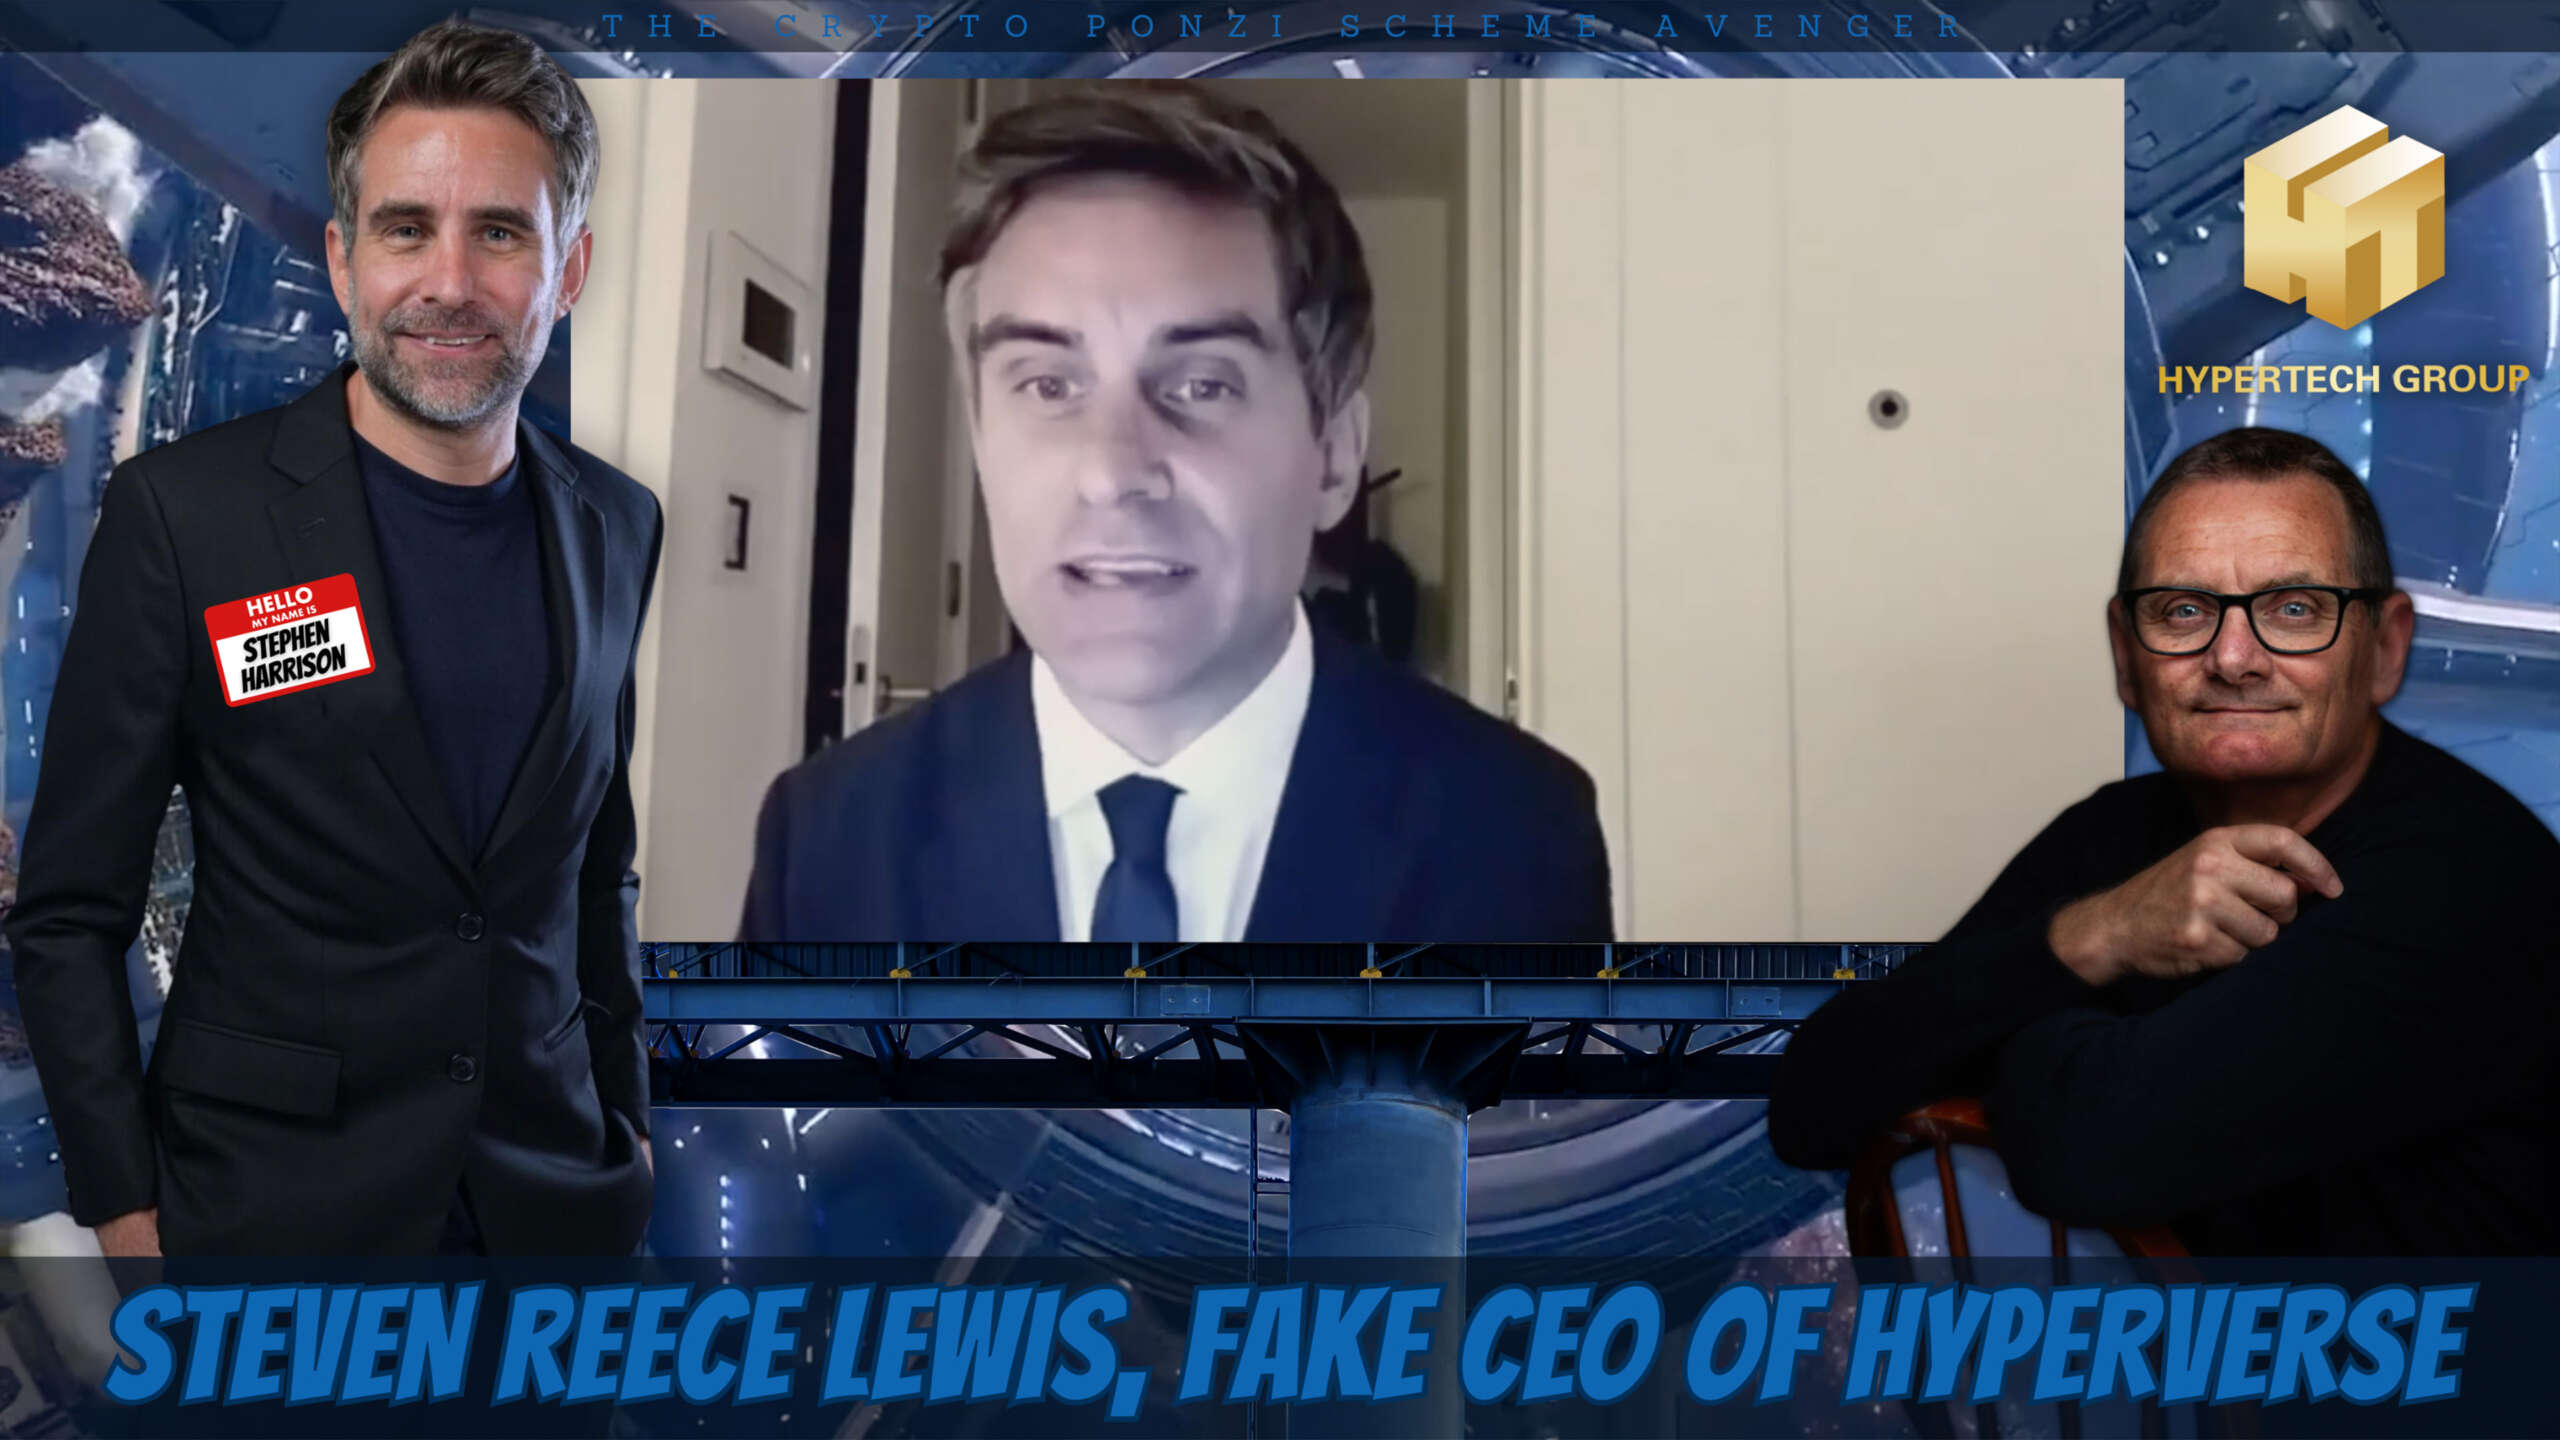 Steven Reece Lewis the Fake CEO of HyperVerse